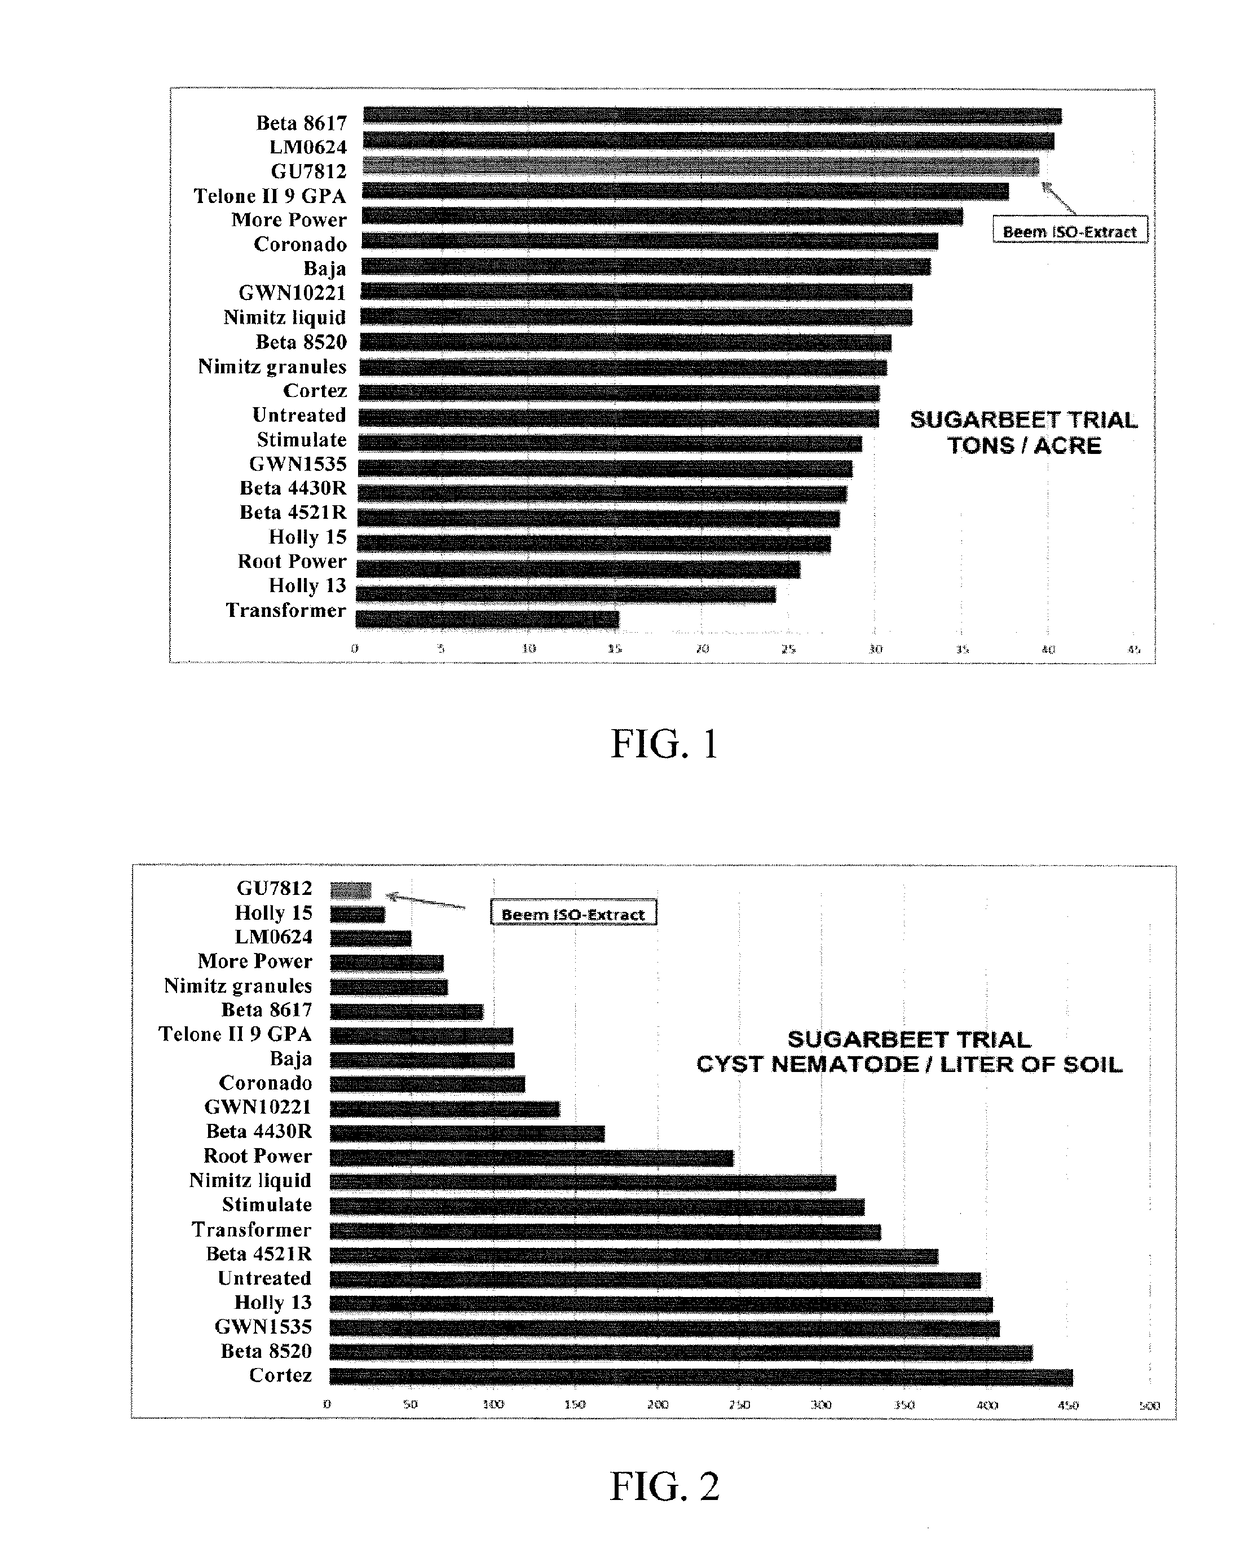 Compositions and their use for pest control and to induce plant hormone and gene regulation for improved plant production and defense